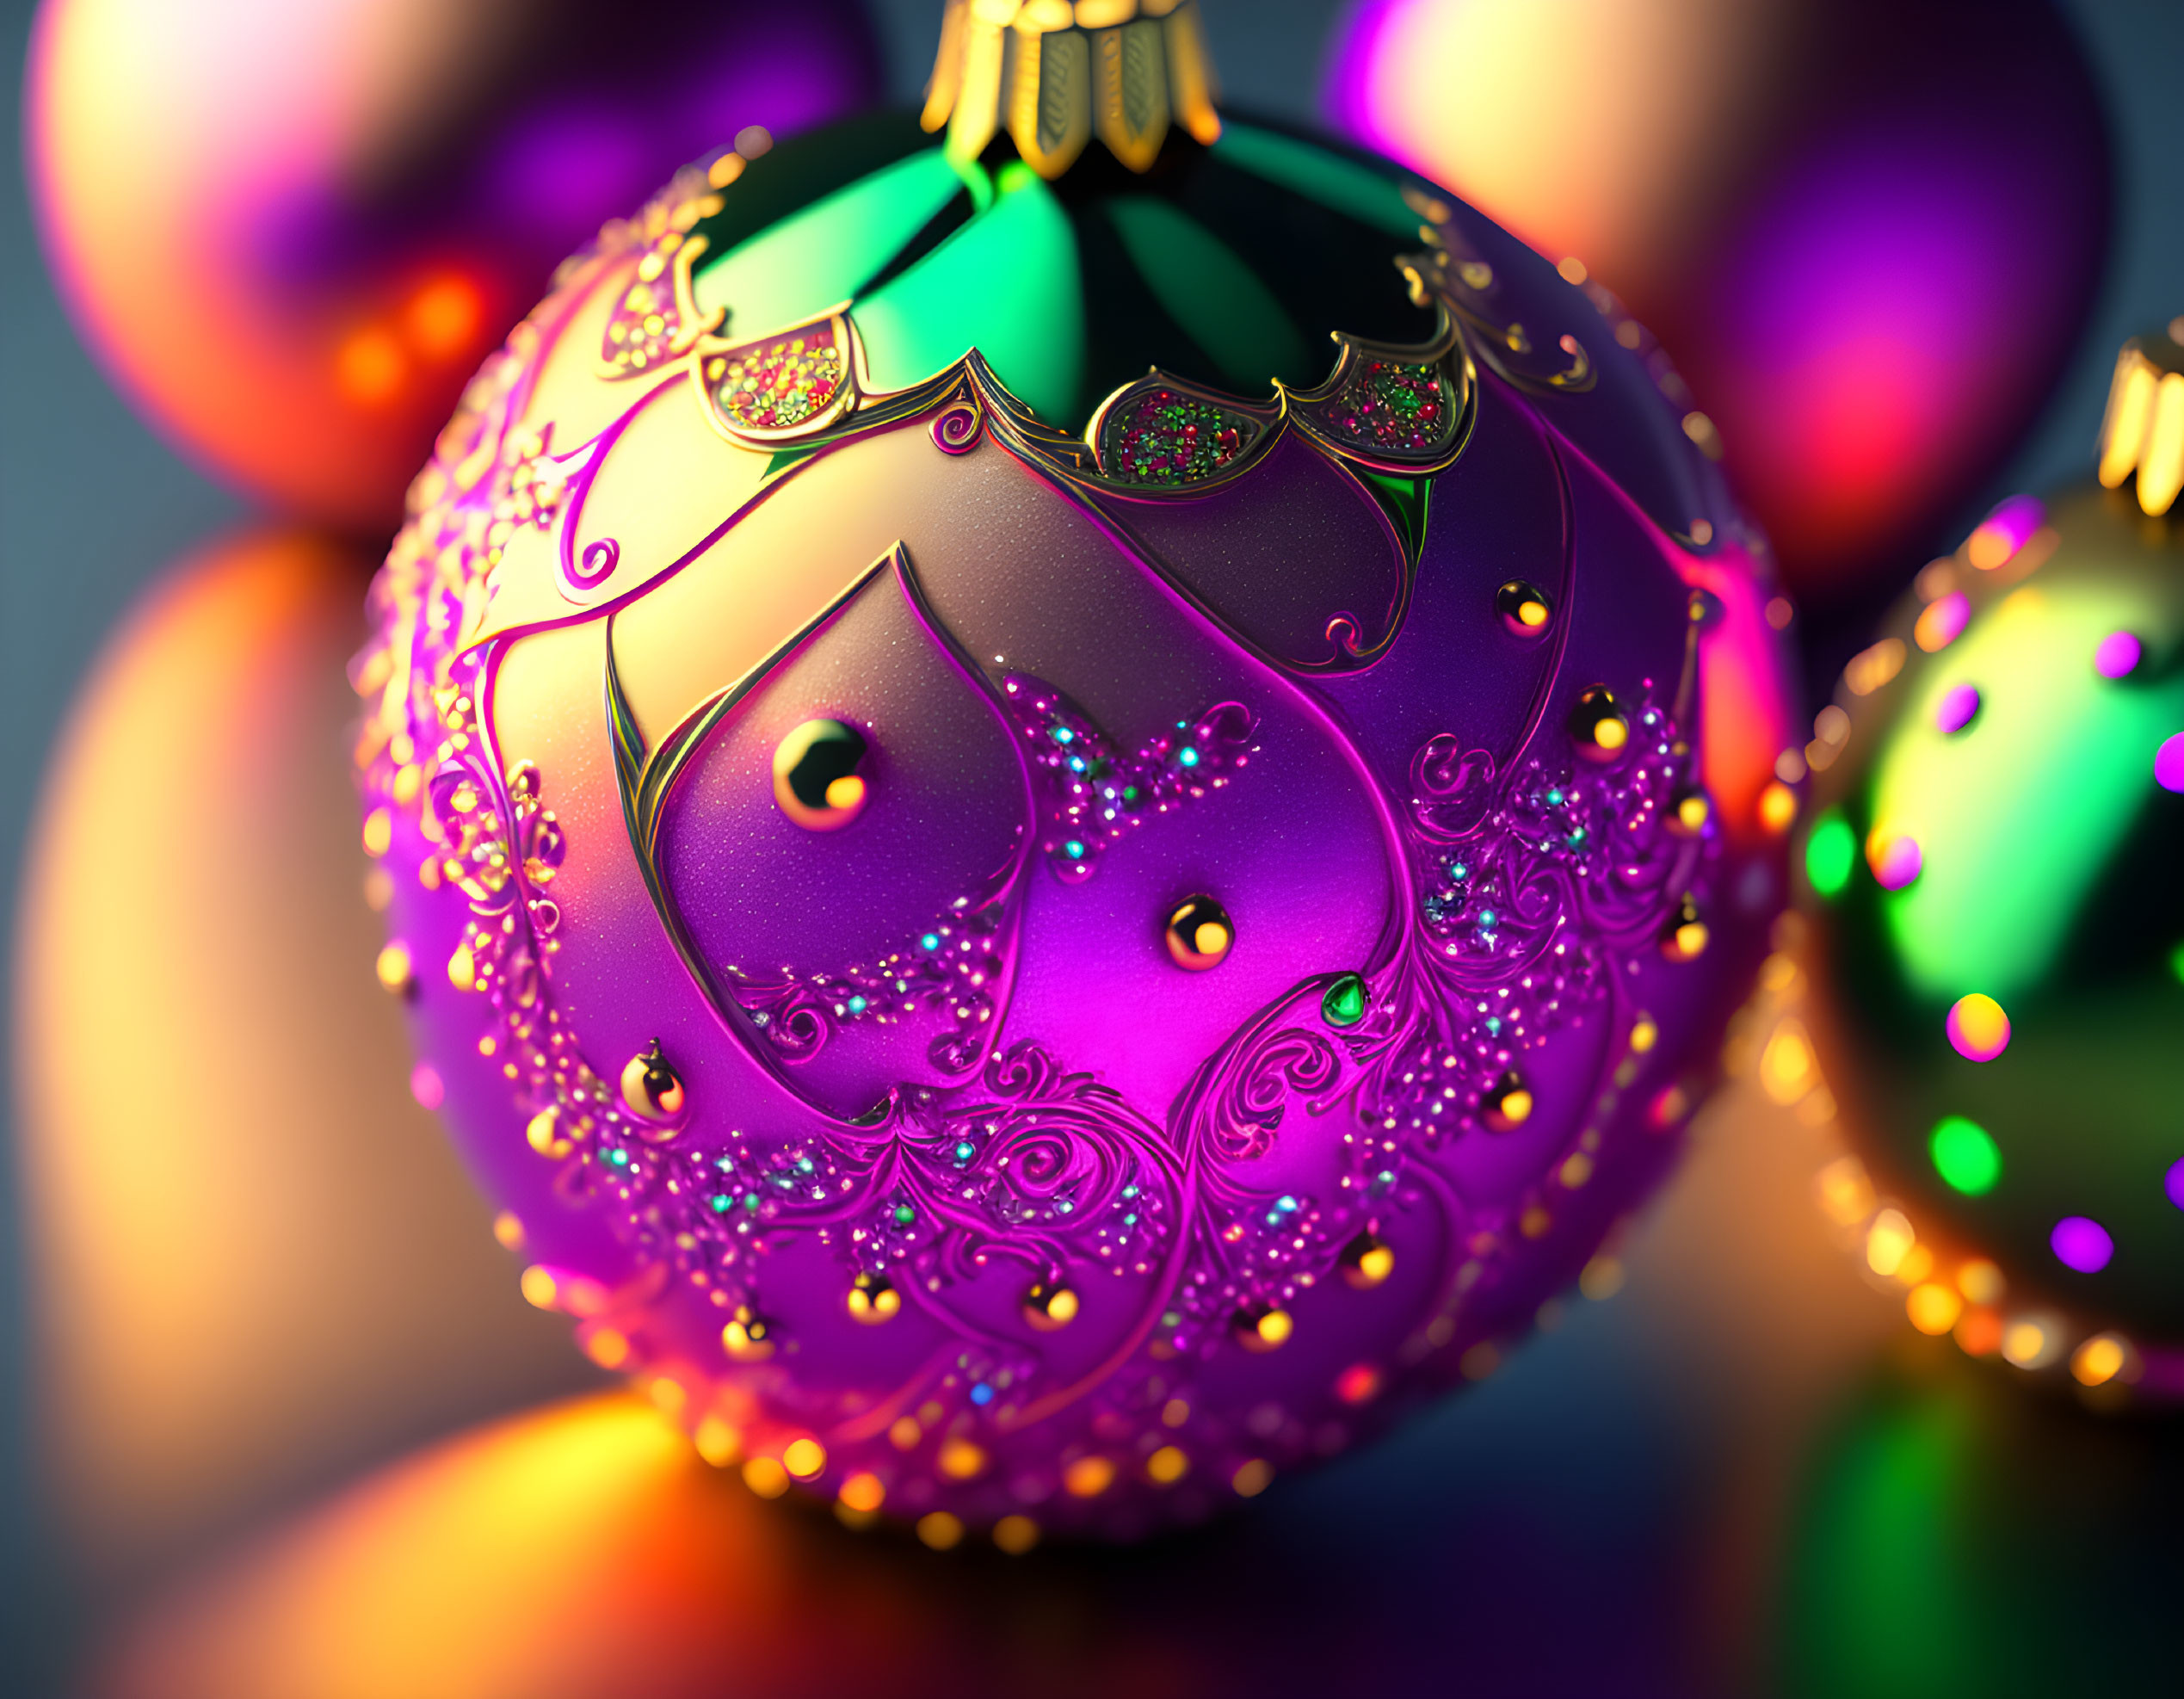 Detailed Purple Christmas Ornament with Gold and Green Patterns